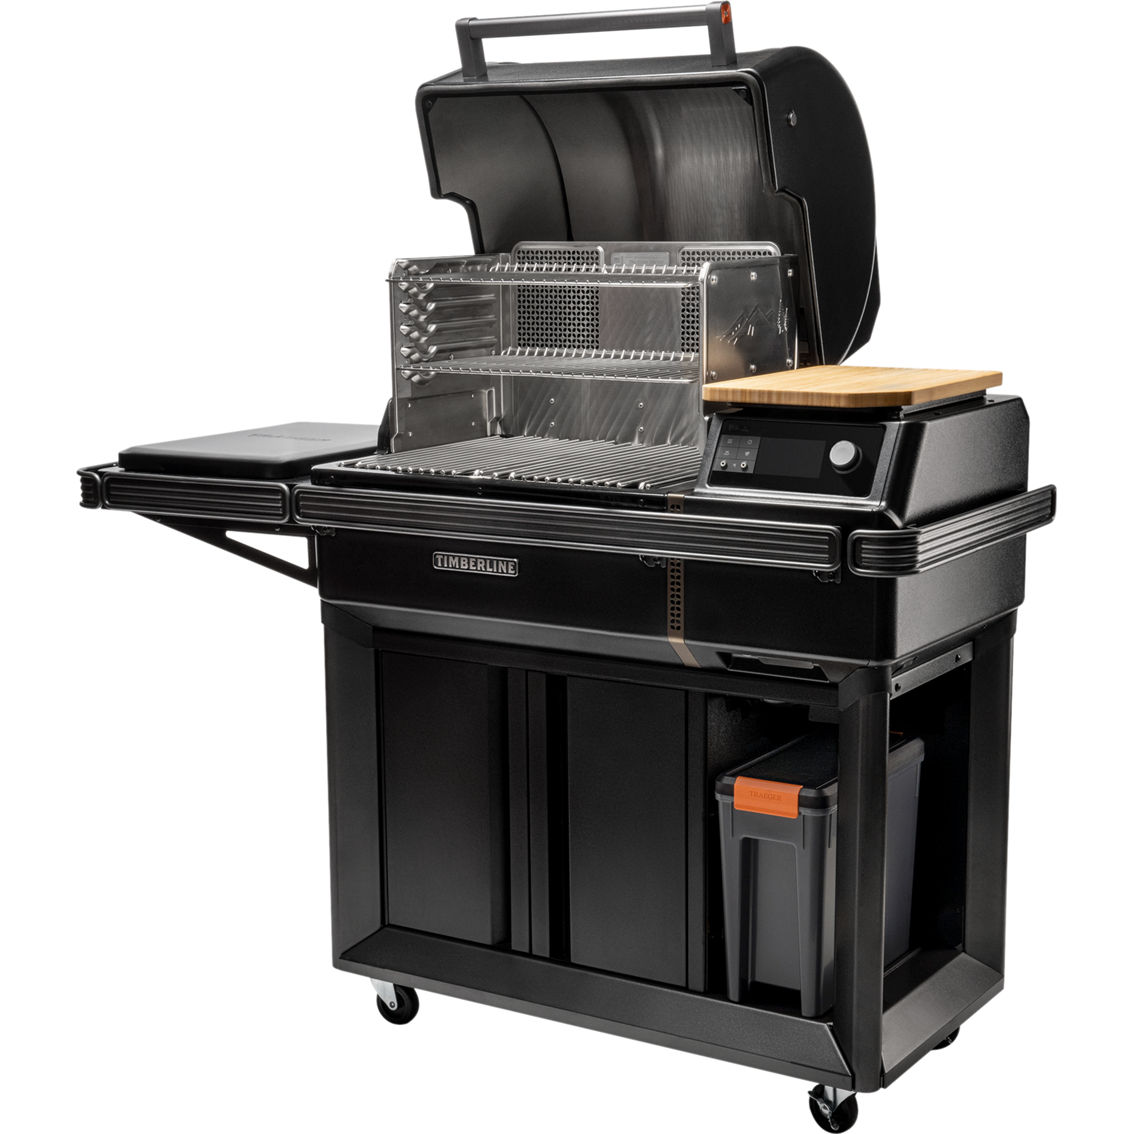 Traeger New Timberline Wood Pellet Grill - Image 3 of 7